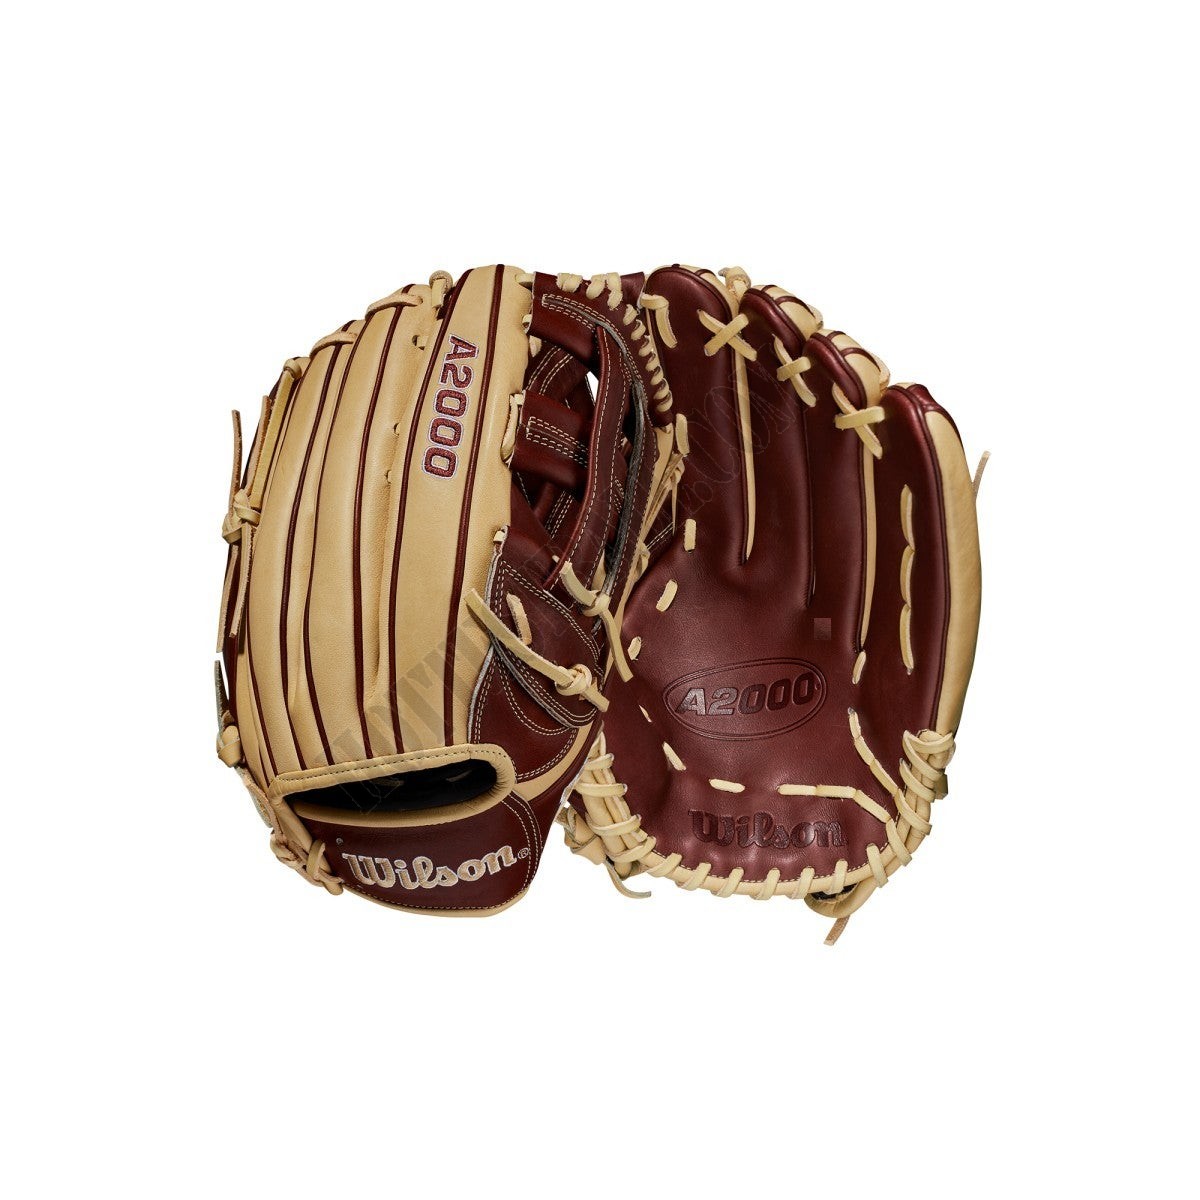 2021 A2000 1799 12.75" Outfield Baseball Glove ● Wilson Promotions - 2021 A2000 1799 12.75" Outfield Baseball Glove ● Wilson Promotions